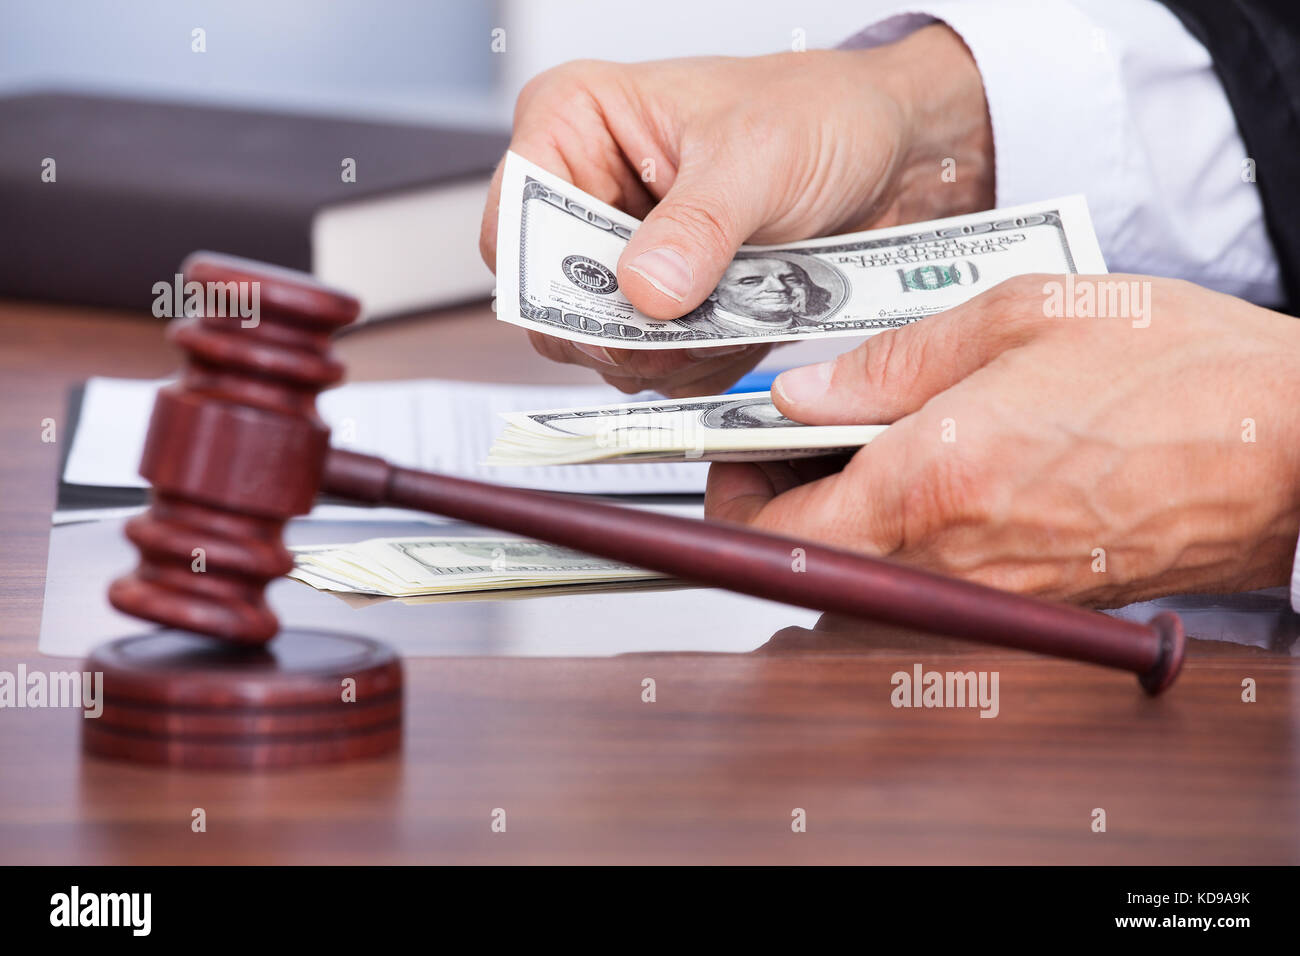 Close-up Of Male Judge's Hand Counting Banknote In Front Of Mallet Stock Photo